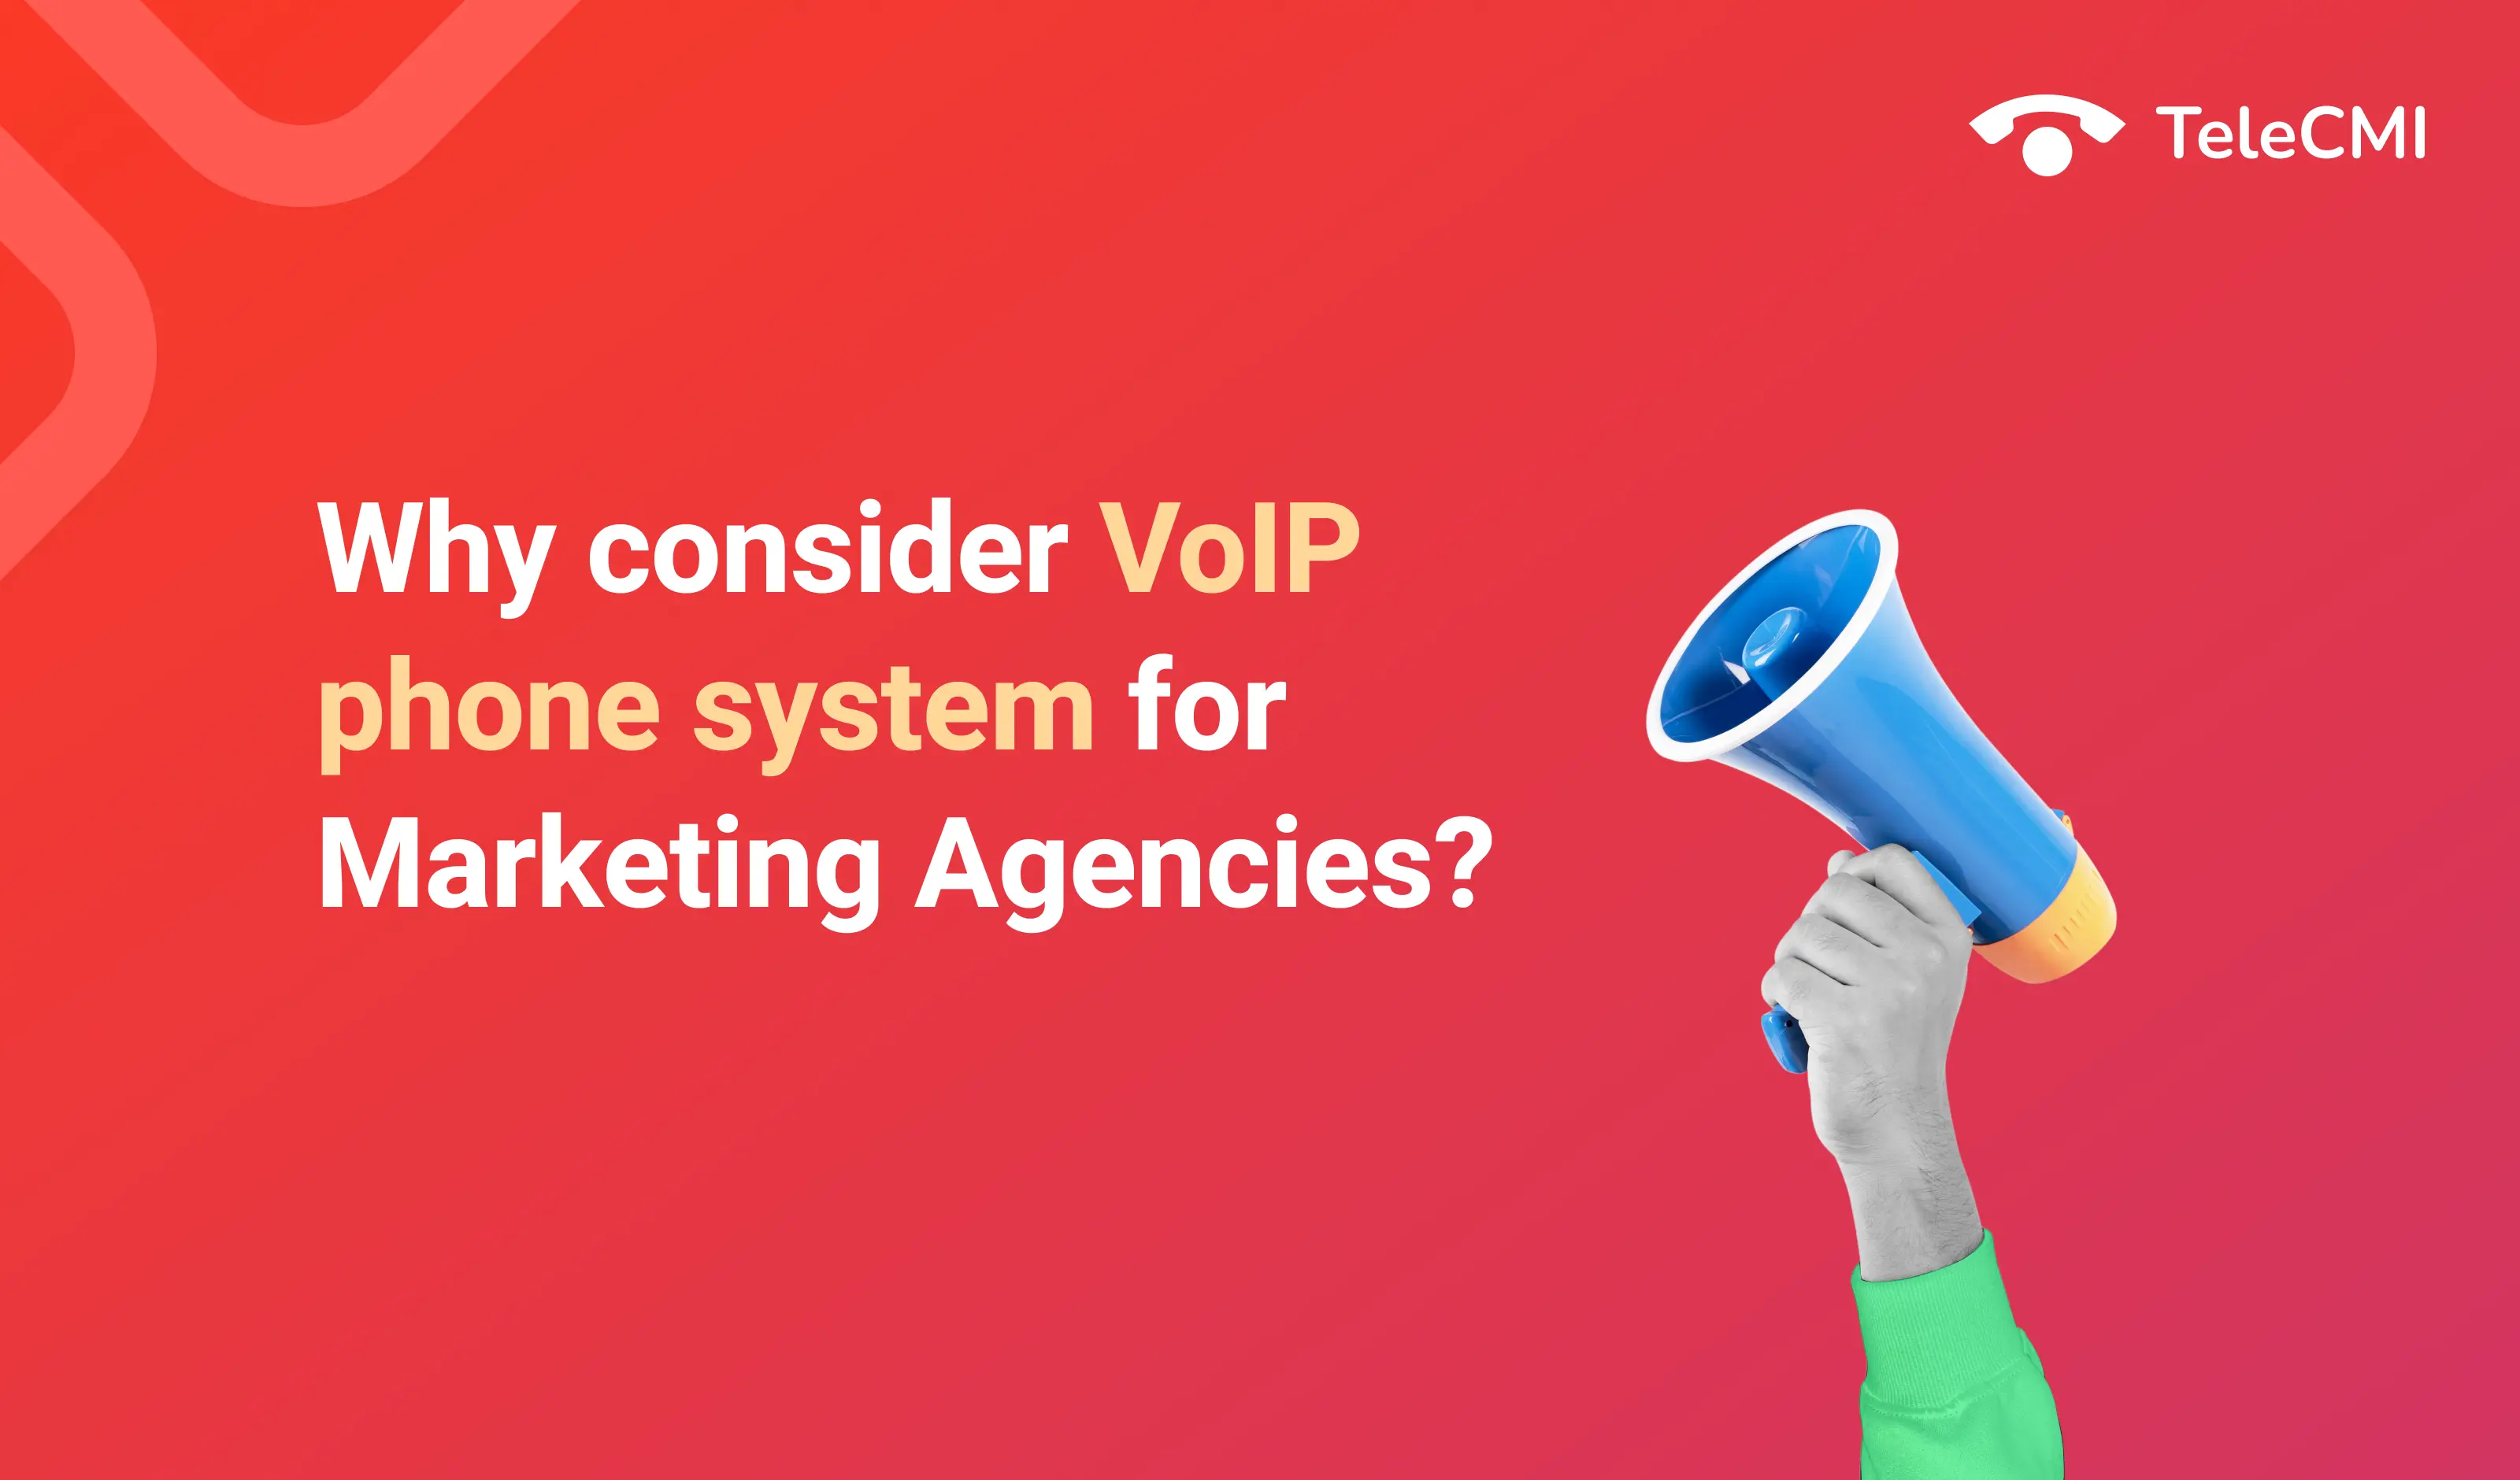 Why Consider VoIP Phone System for Marketing Agencies?